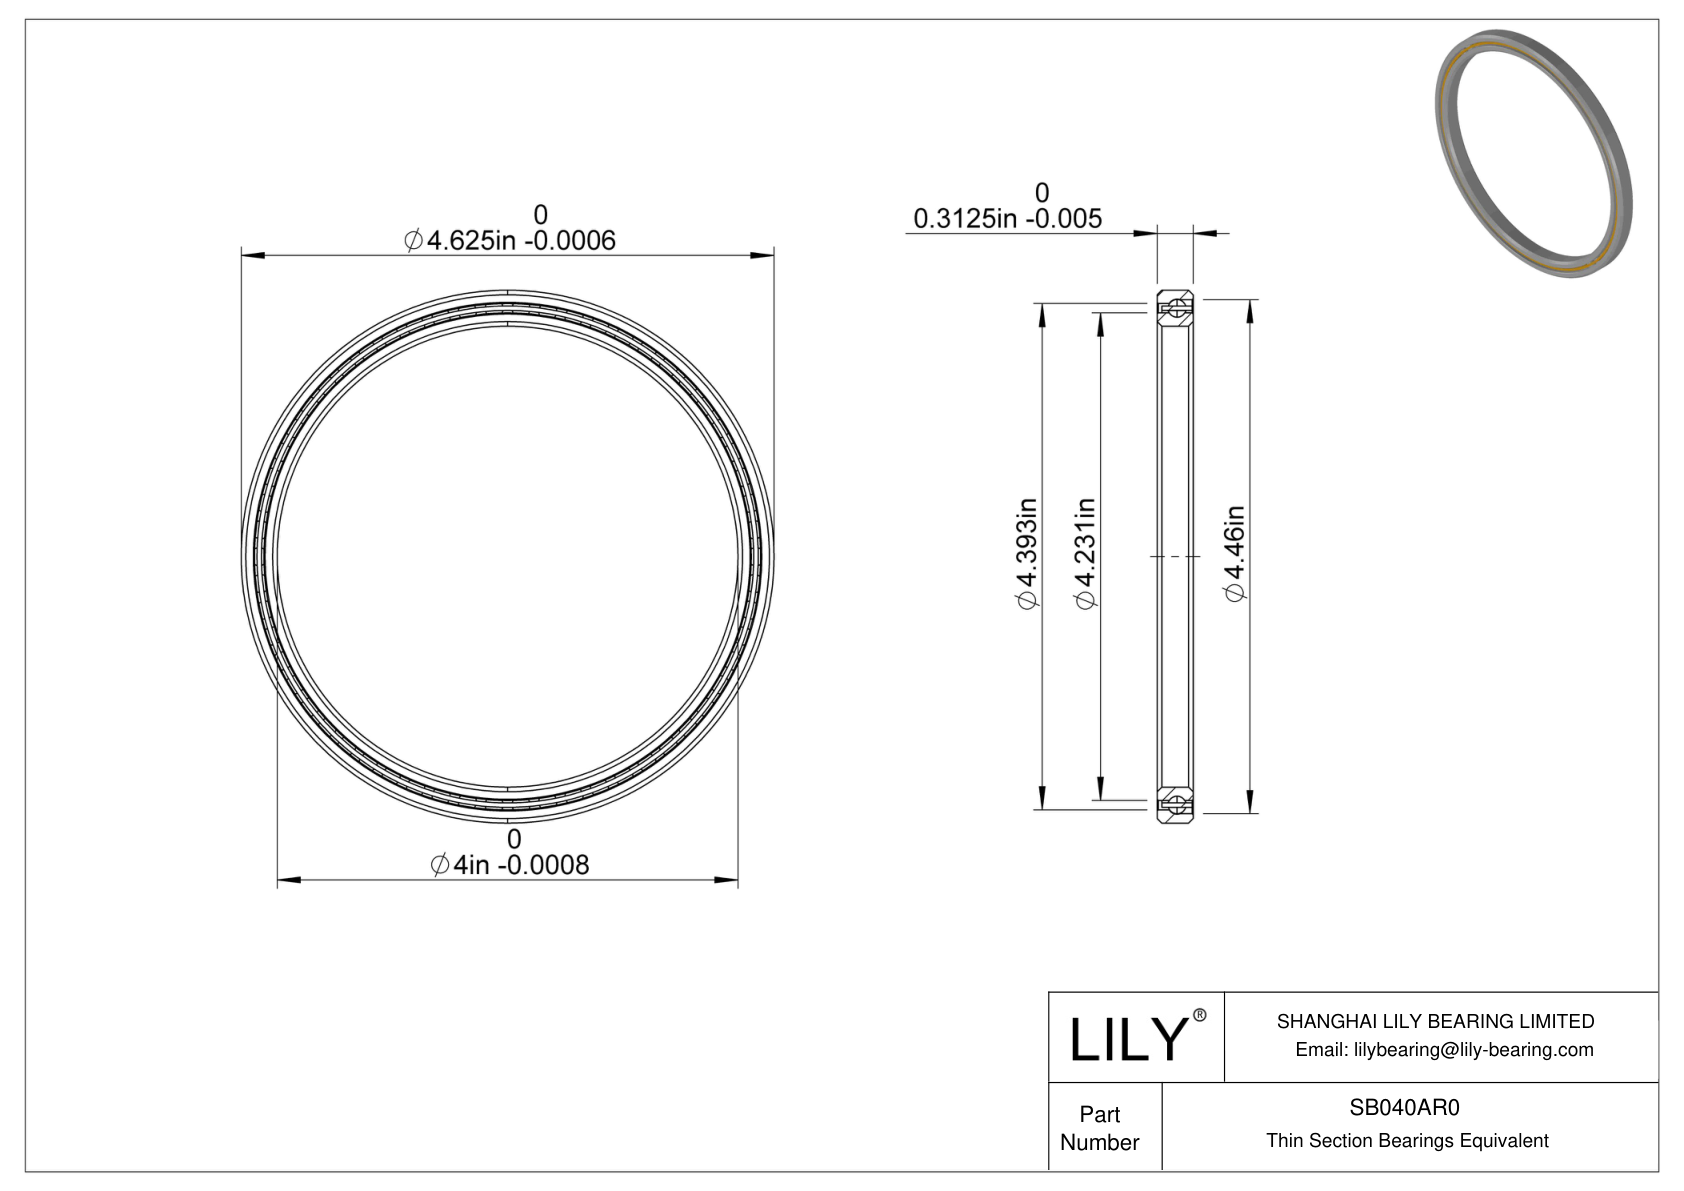 SB040AR0 Constant Section (CS) Bearings cad drawing